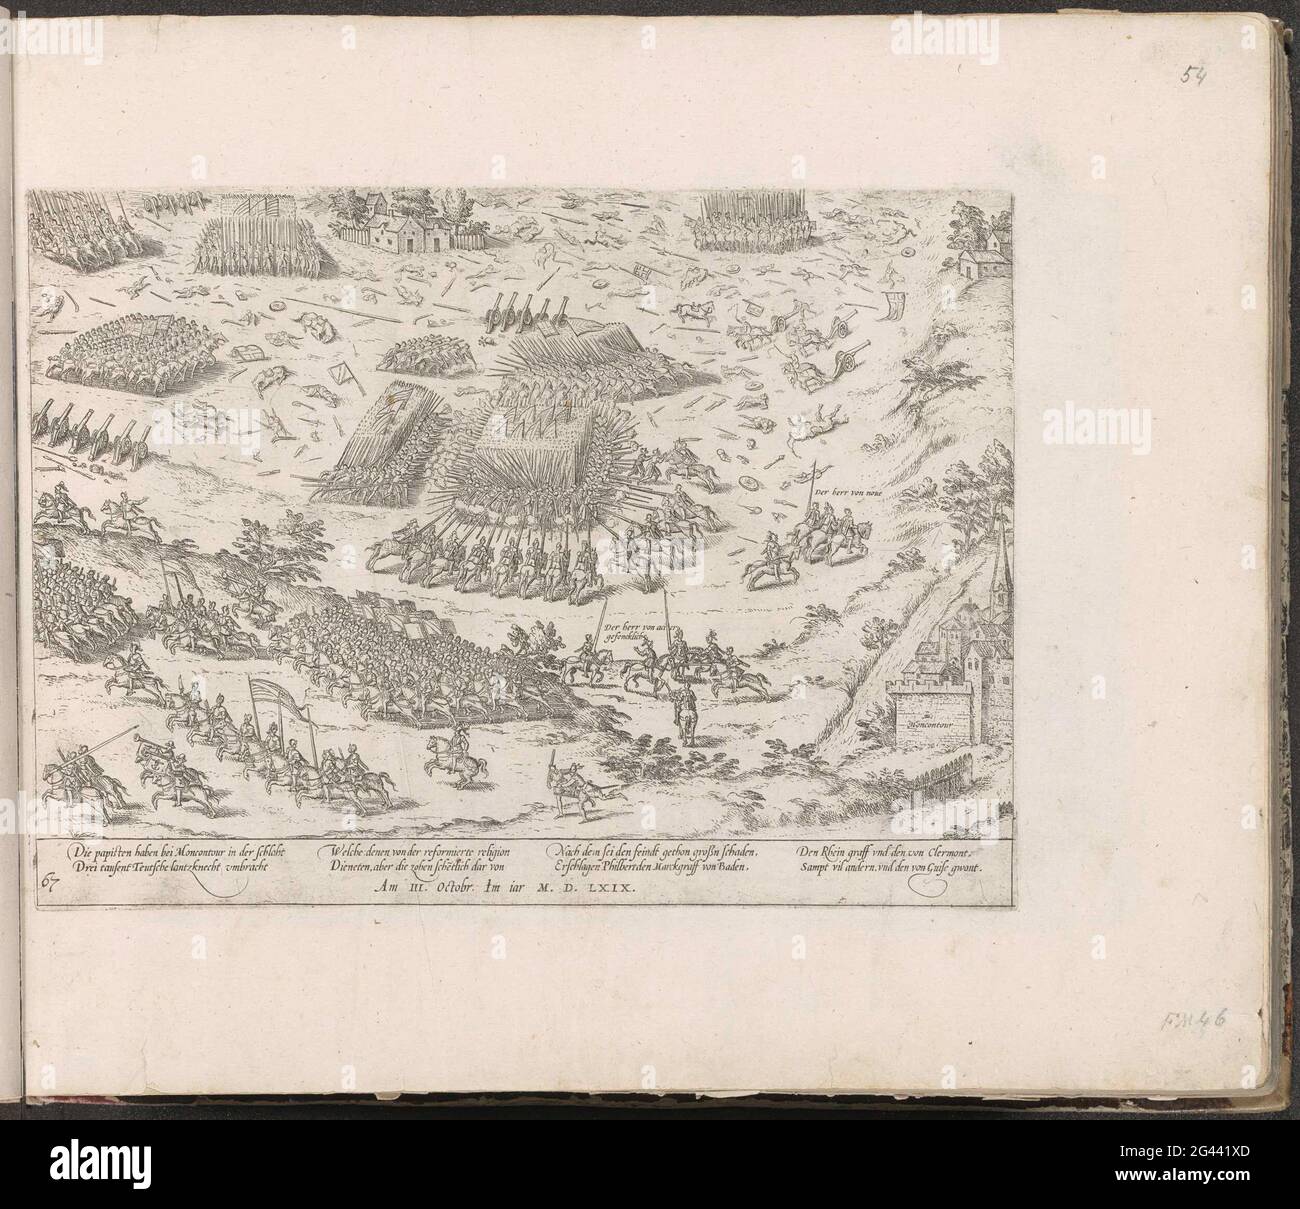 Battle of Moncontour, 1569; Series 3: French religious wars, 1559-1573. Battle of Moncontour, October 3, 1569. View of the battlefield. With caption of 8 rules in German. Left below numbered: 67. The print is part of an album. Stock Photo